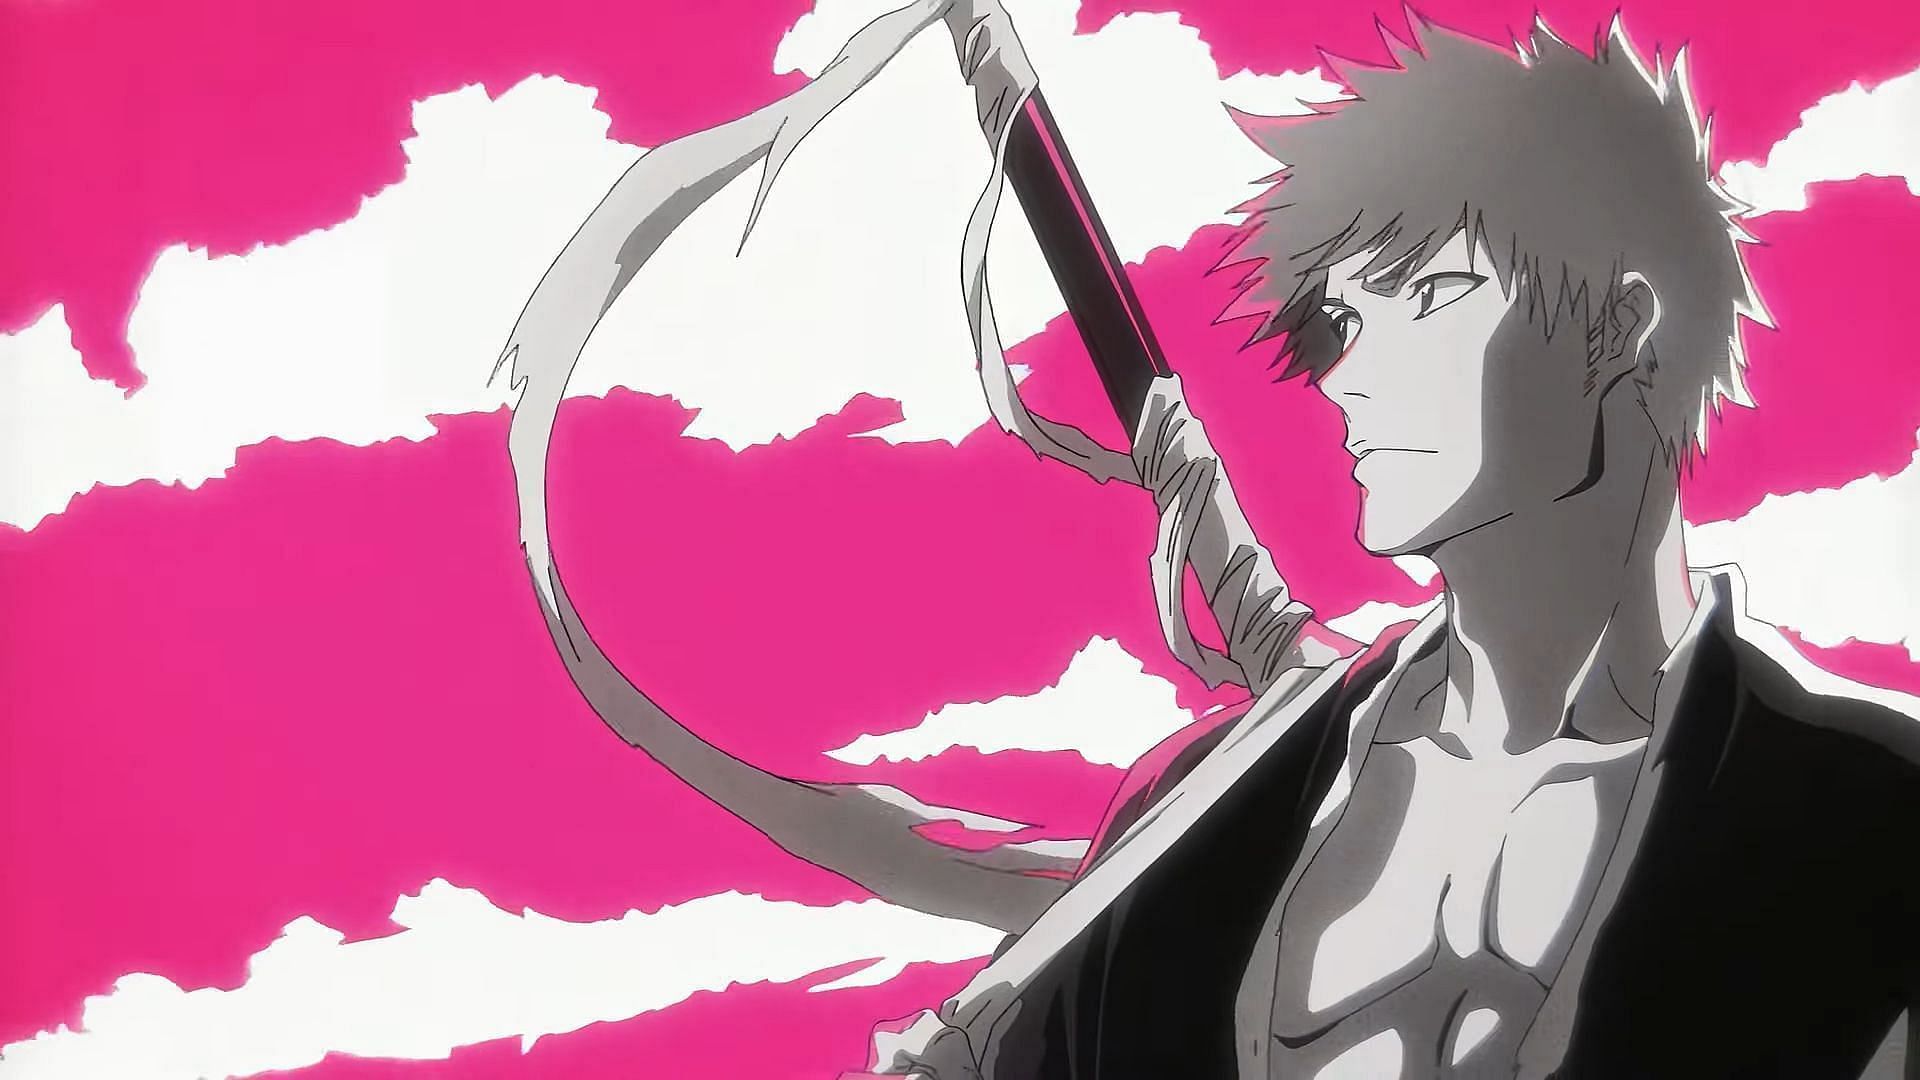 Bleach: TYBW will be returning to TV screens sooner than fans thought, but without new content in tow (Image via Studio Pierrot)